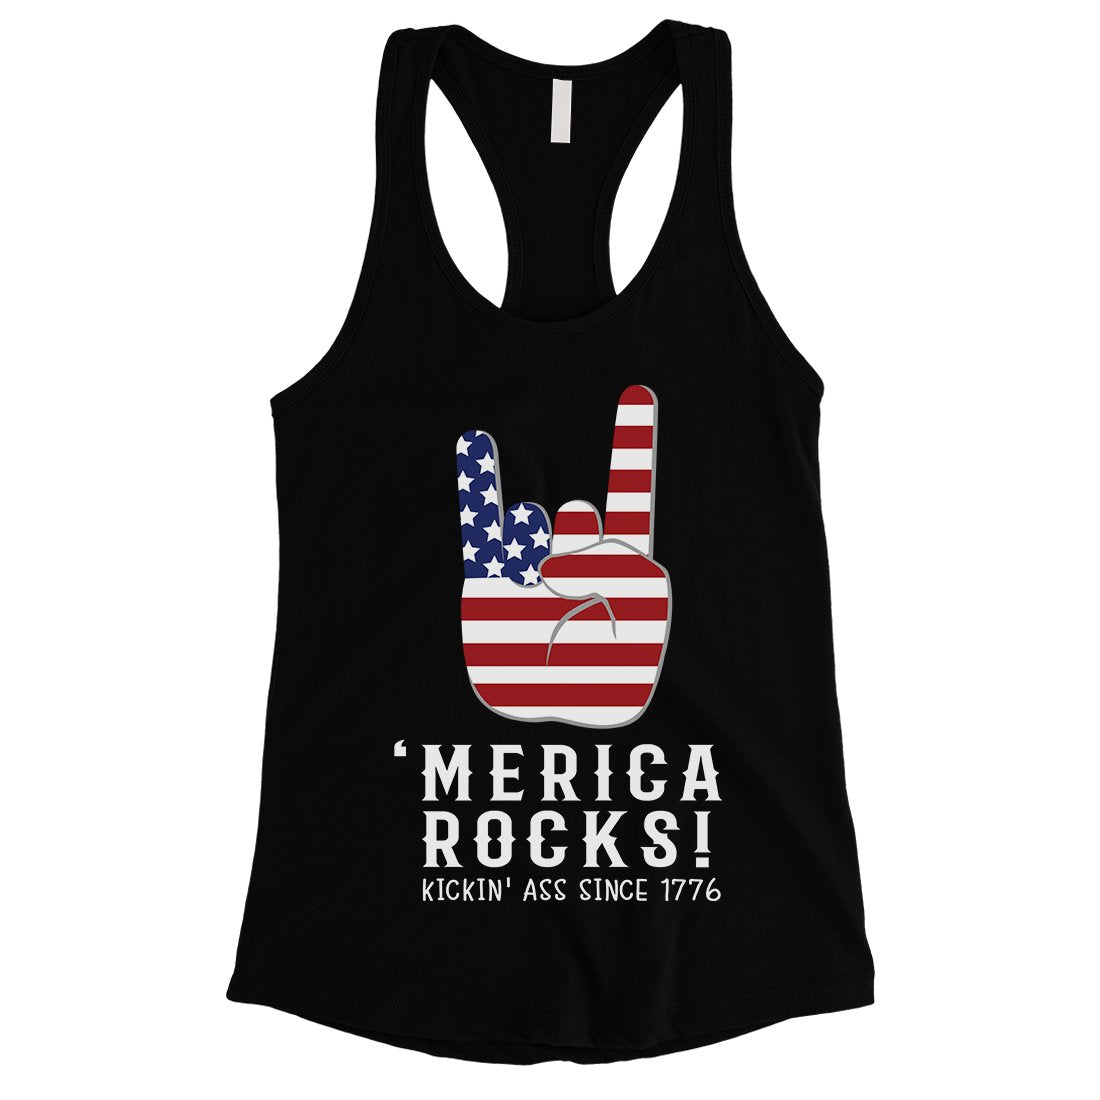 Merica Rocks Womens Cute Graphic Tank Top For 4th Of July Outfit